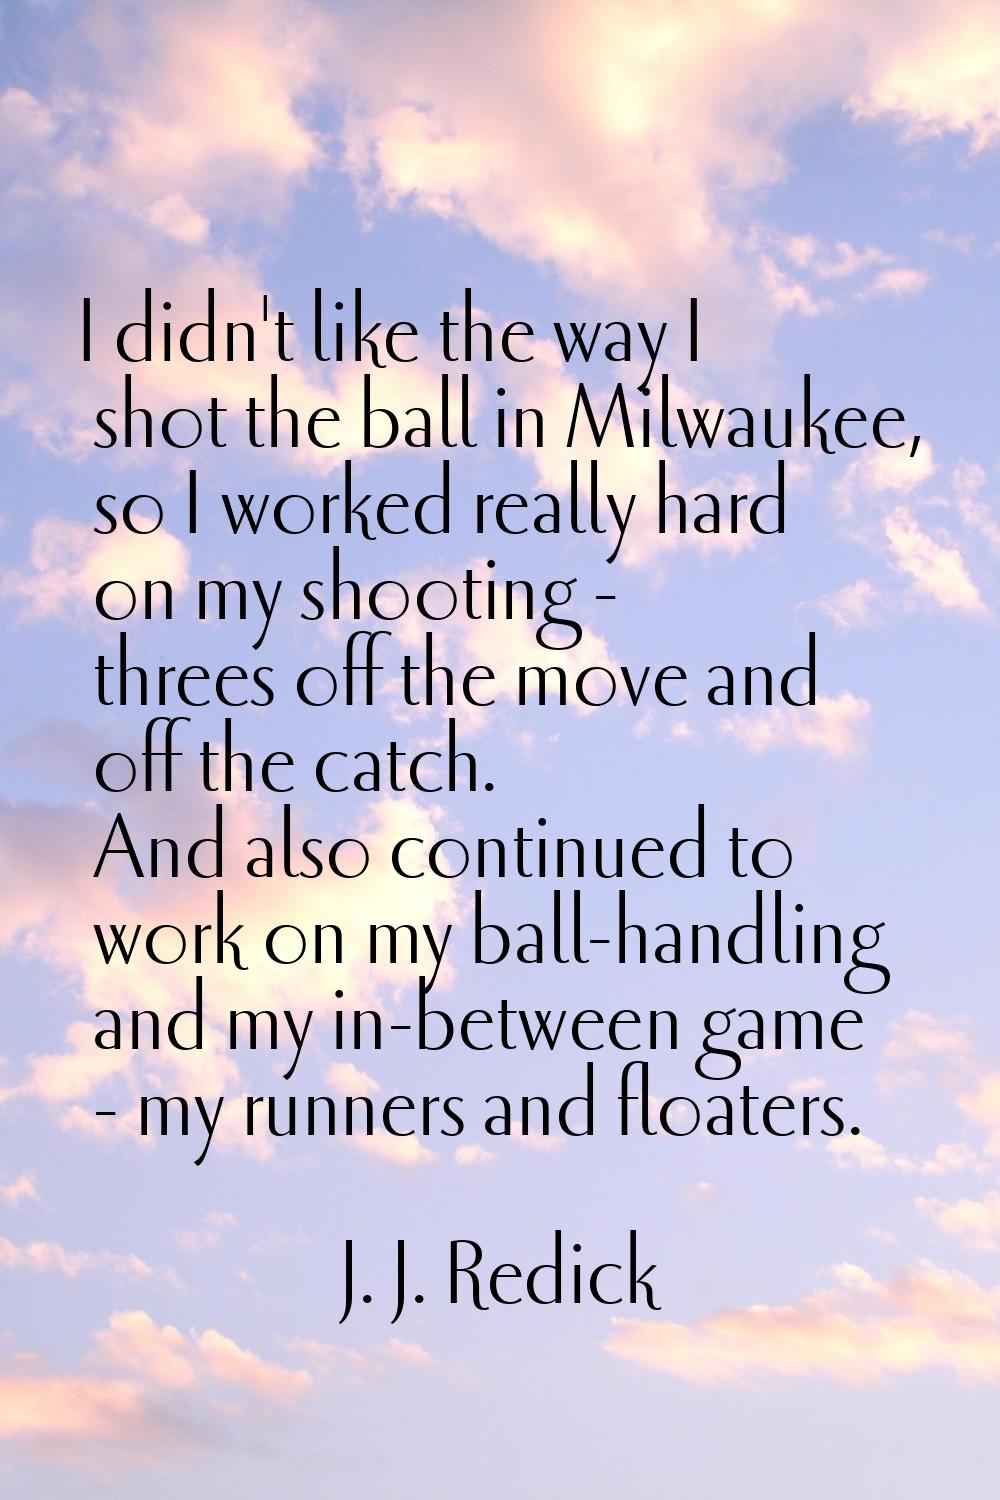 I didn't like the way I shot the ball in Milwaukee, so I worked really hard on my shooting - threes